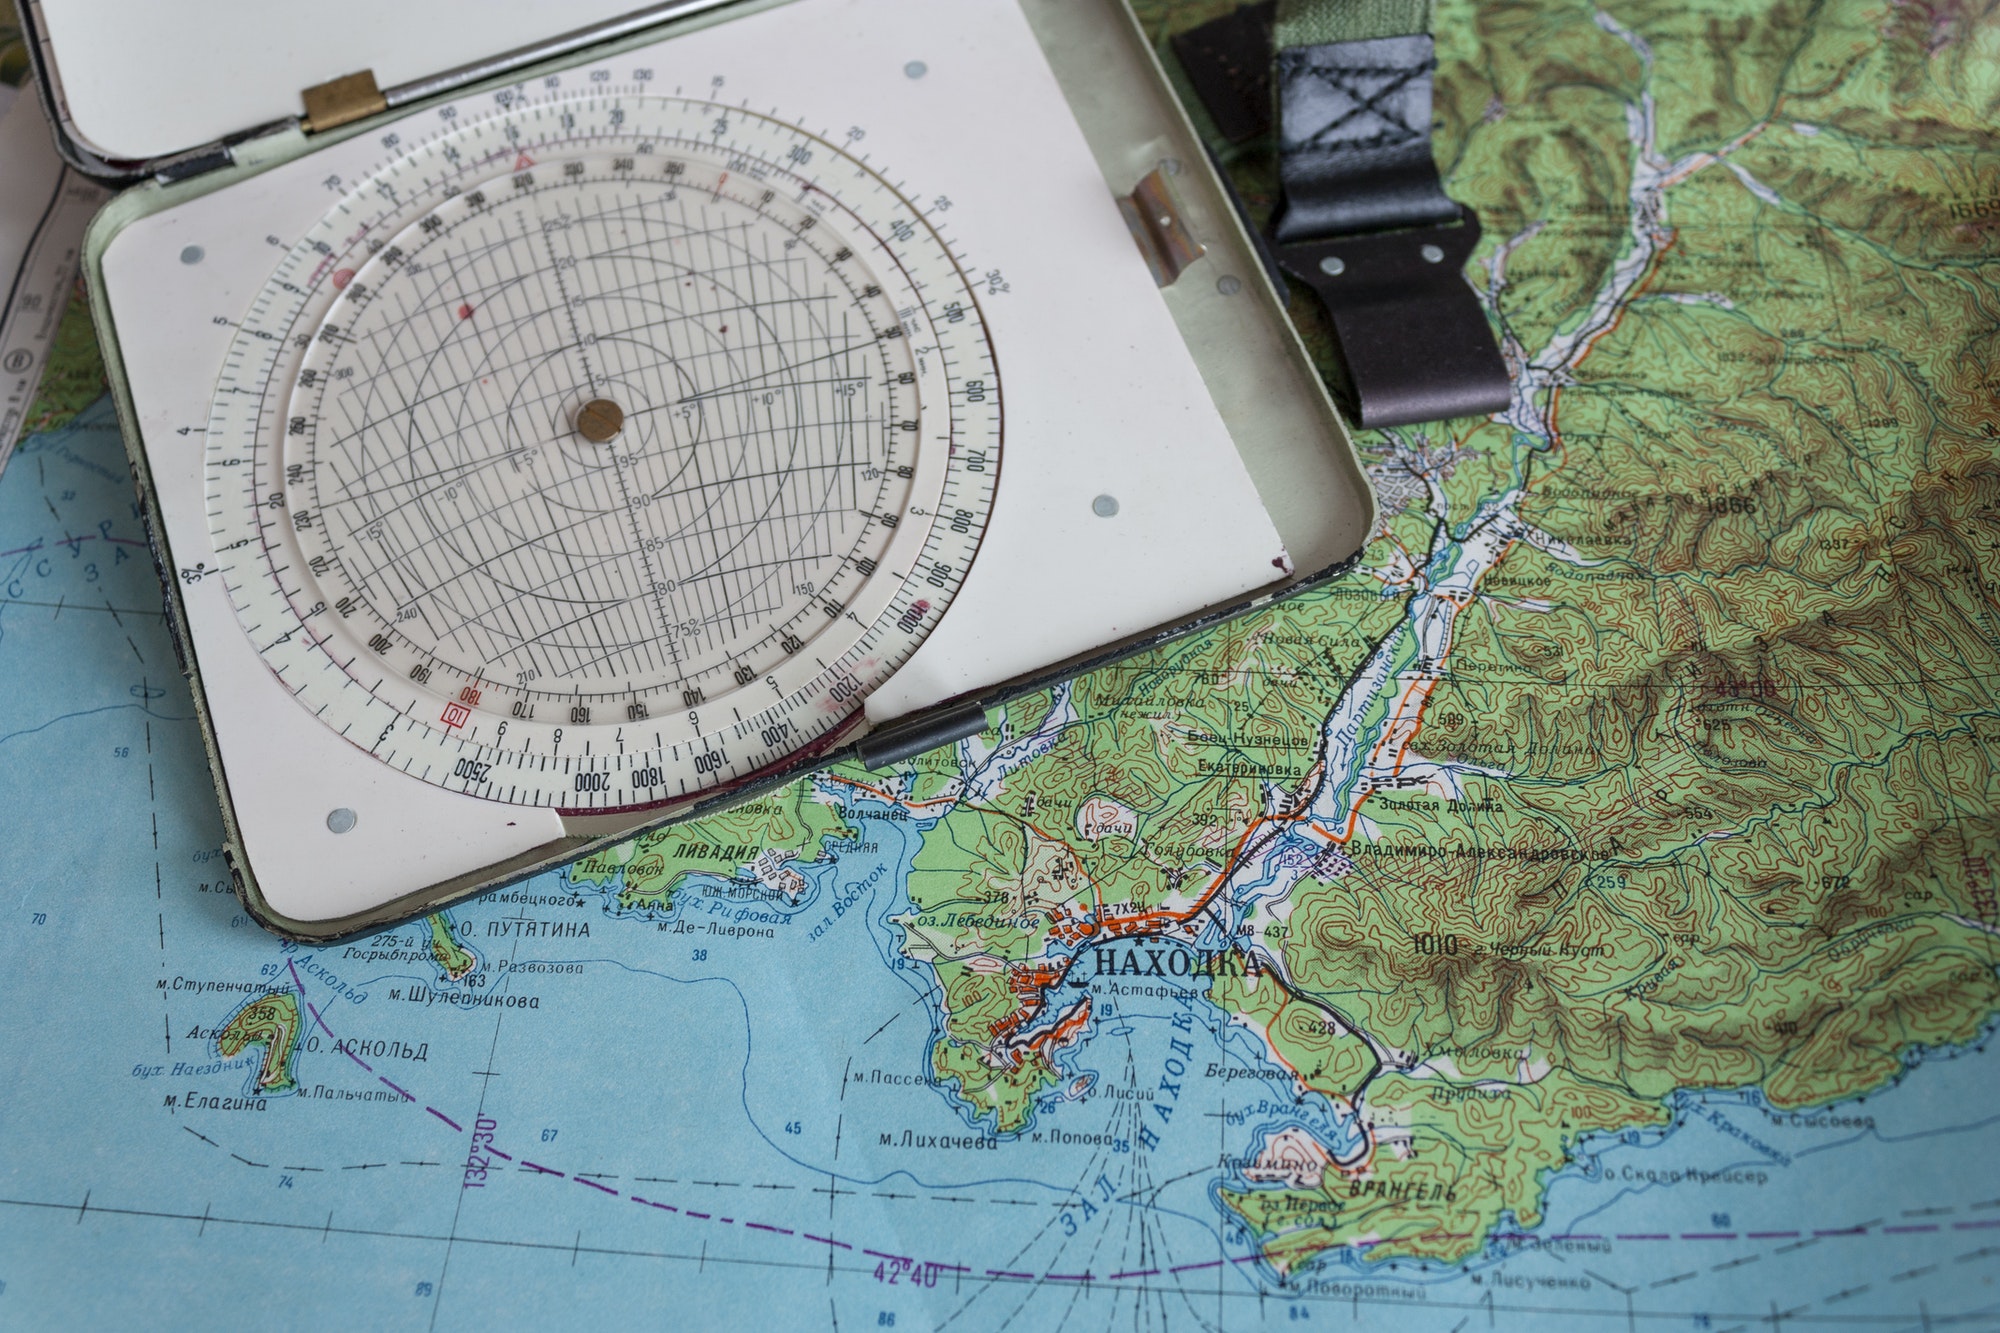 Map And Navigational Instruments For Laying The Way.